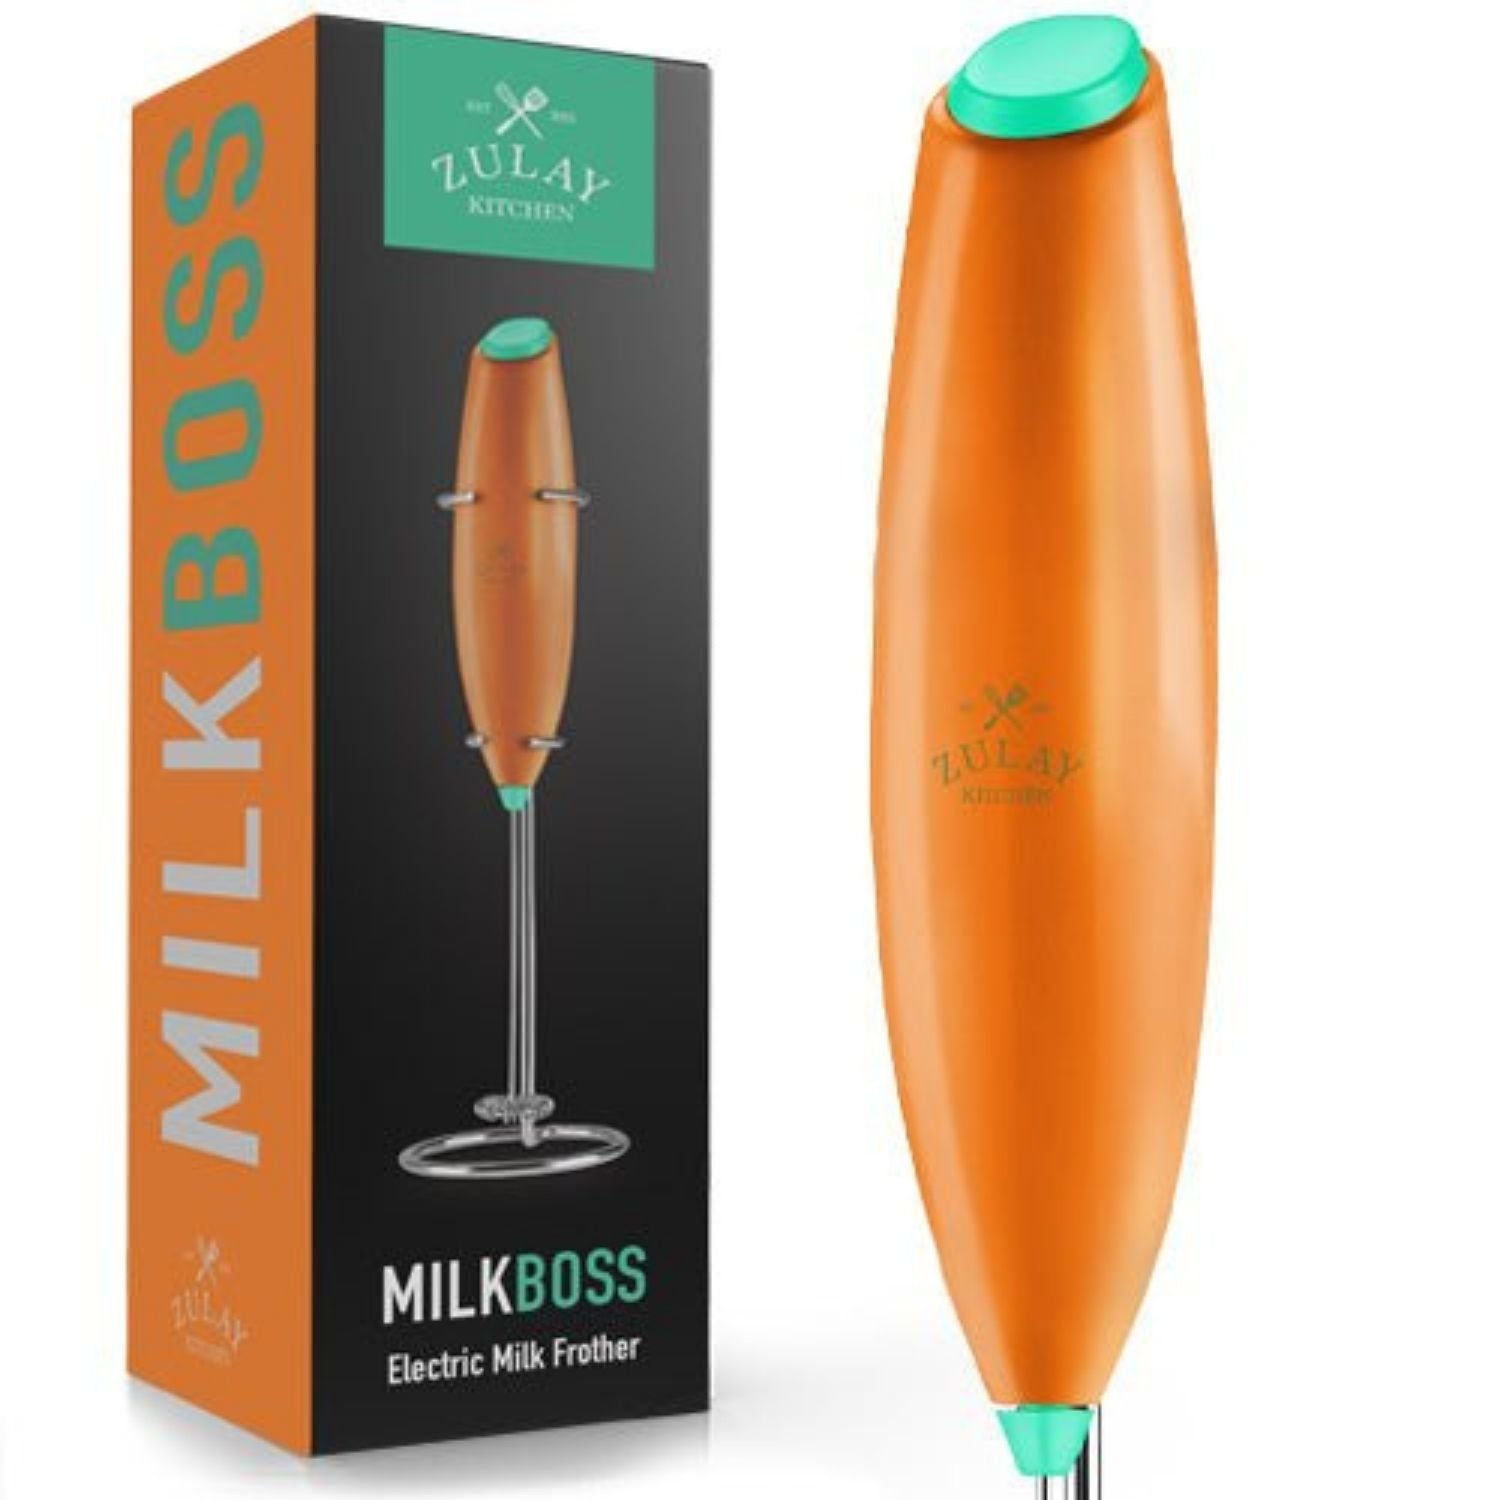 Zulay Kitchen MILK BOSS Milk Frother With Stand - Mimosas, 1 - Kroger